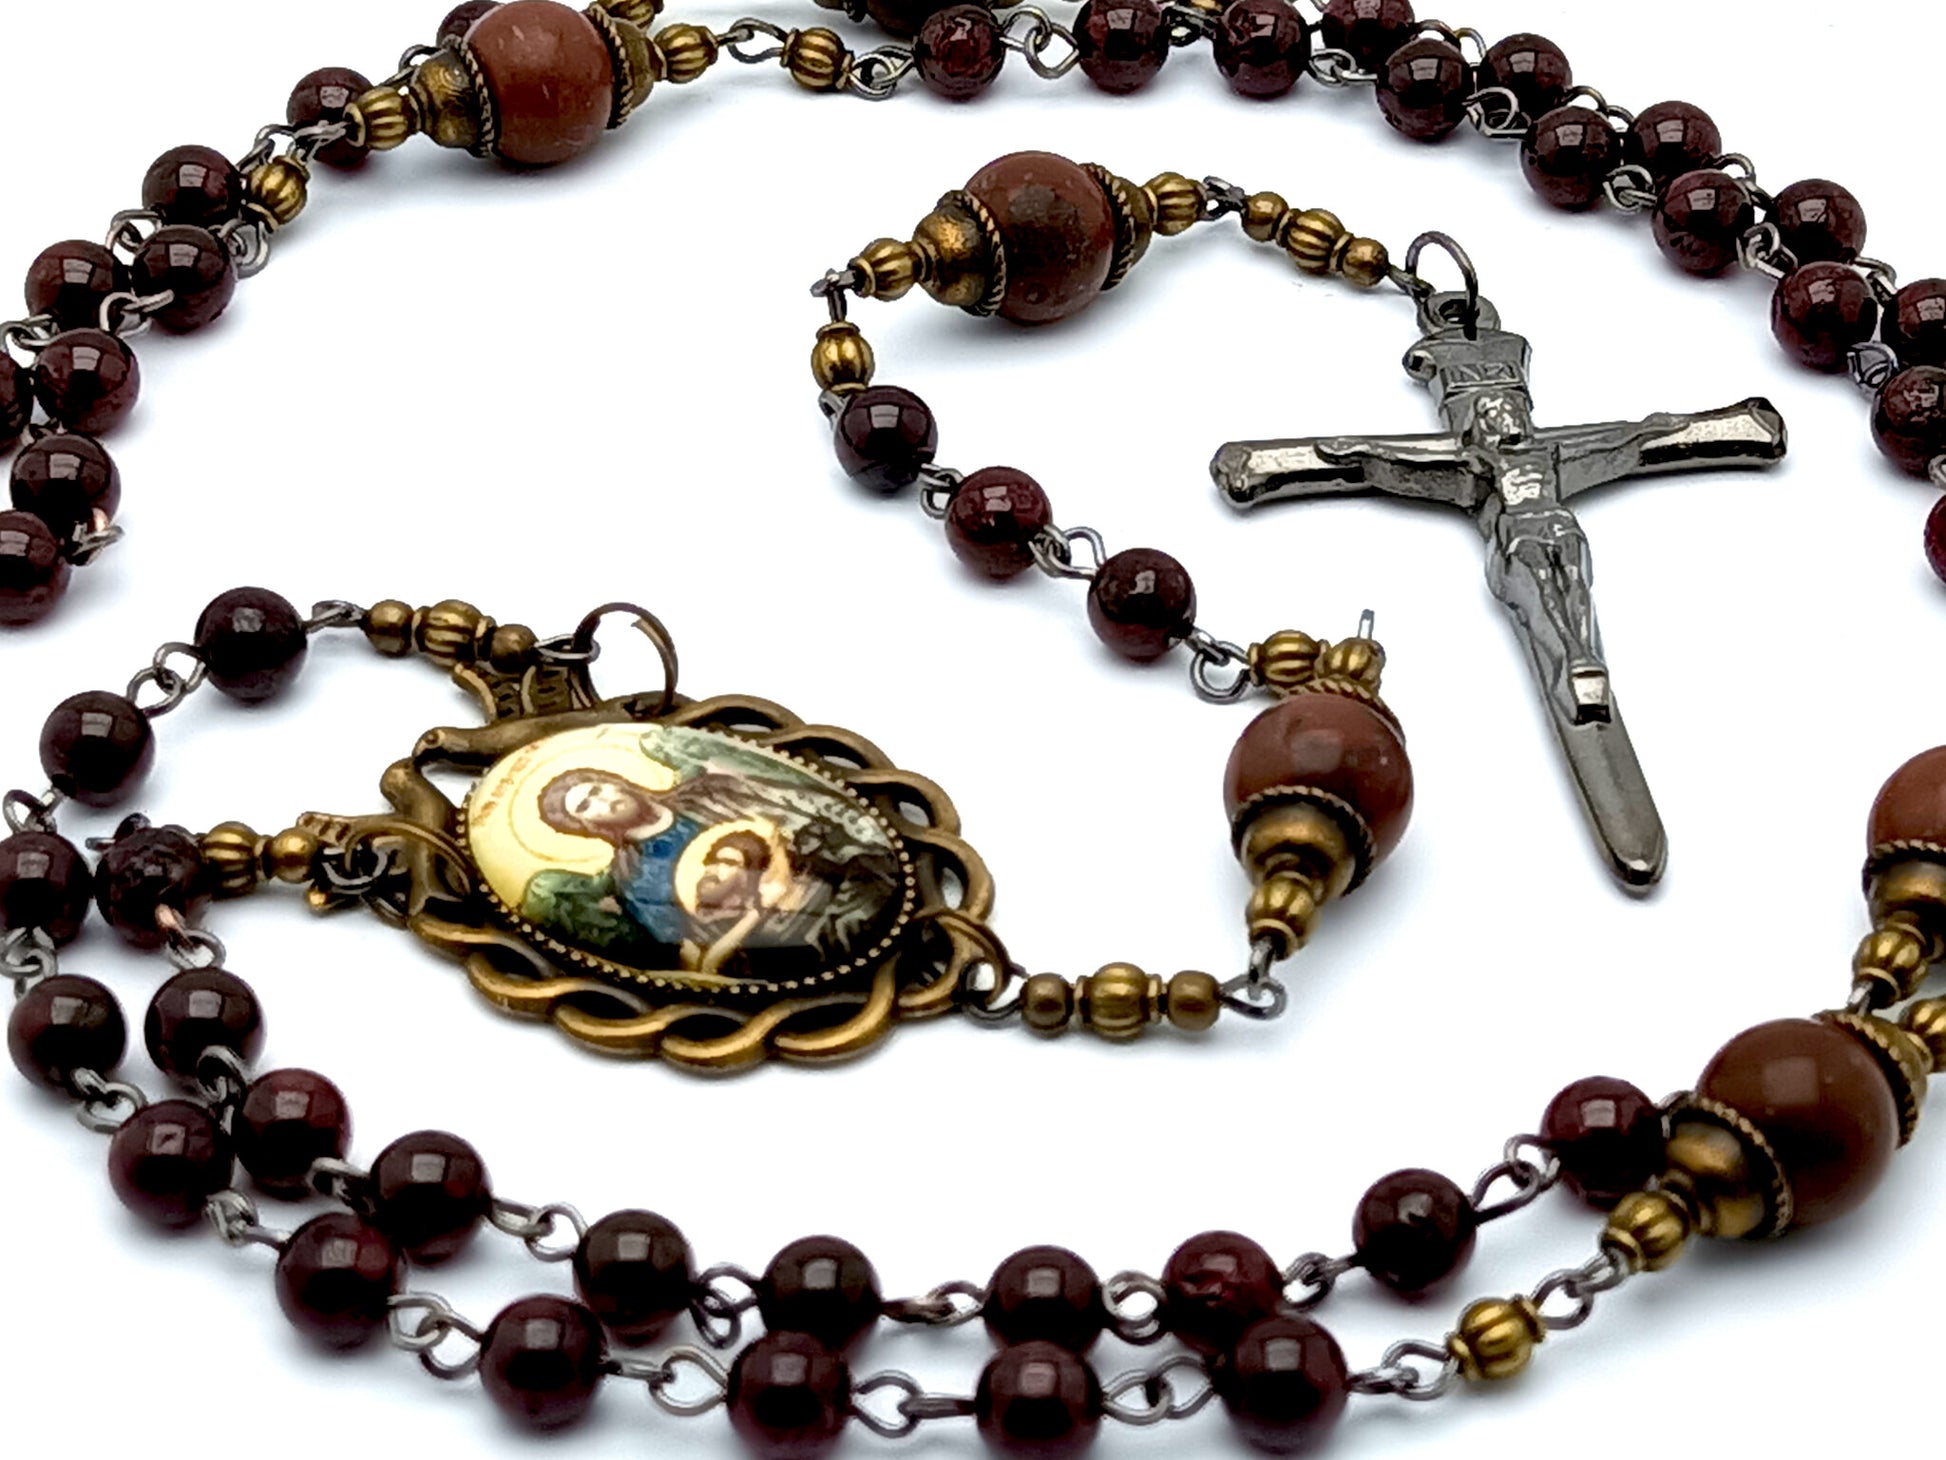 Antique style Saint John the Baptist unique rosary beads with garnet gemstone beads and nail crucifix and Holy Spirit domed center medal.